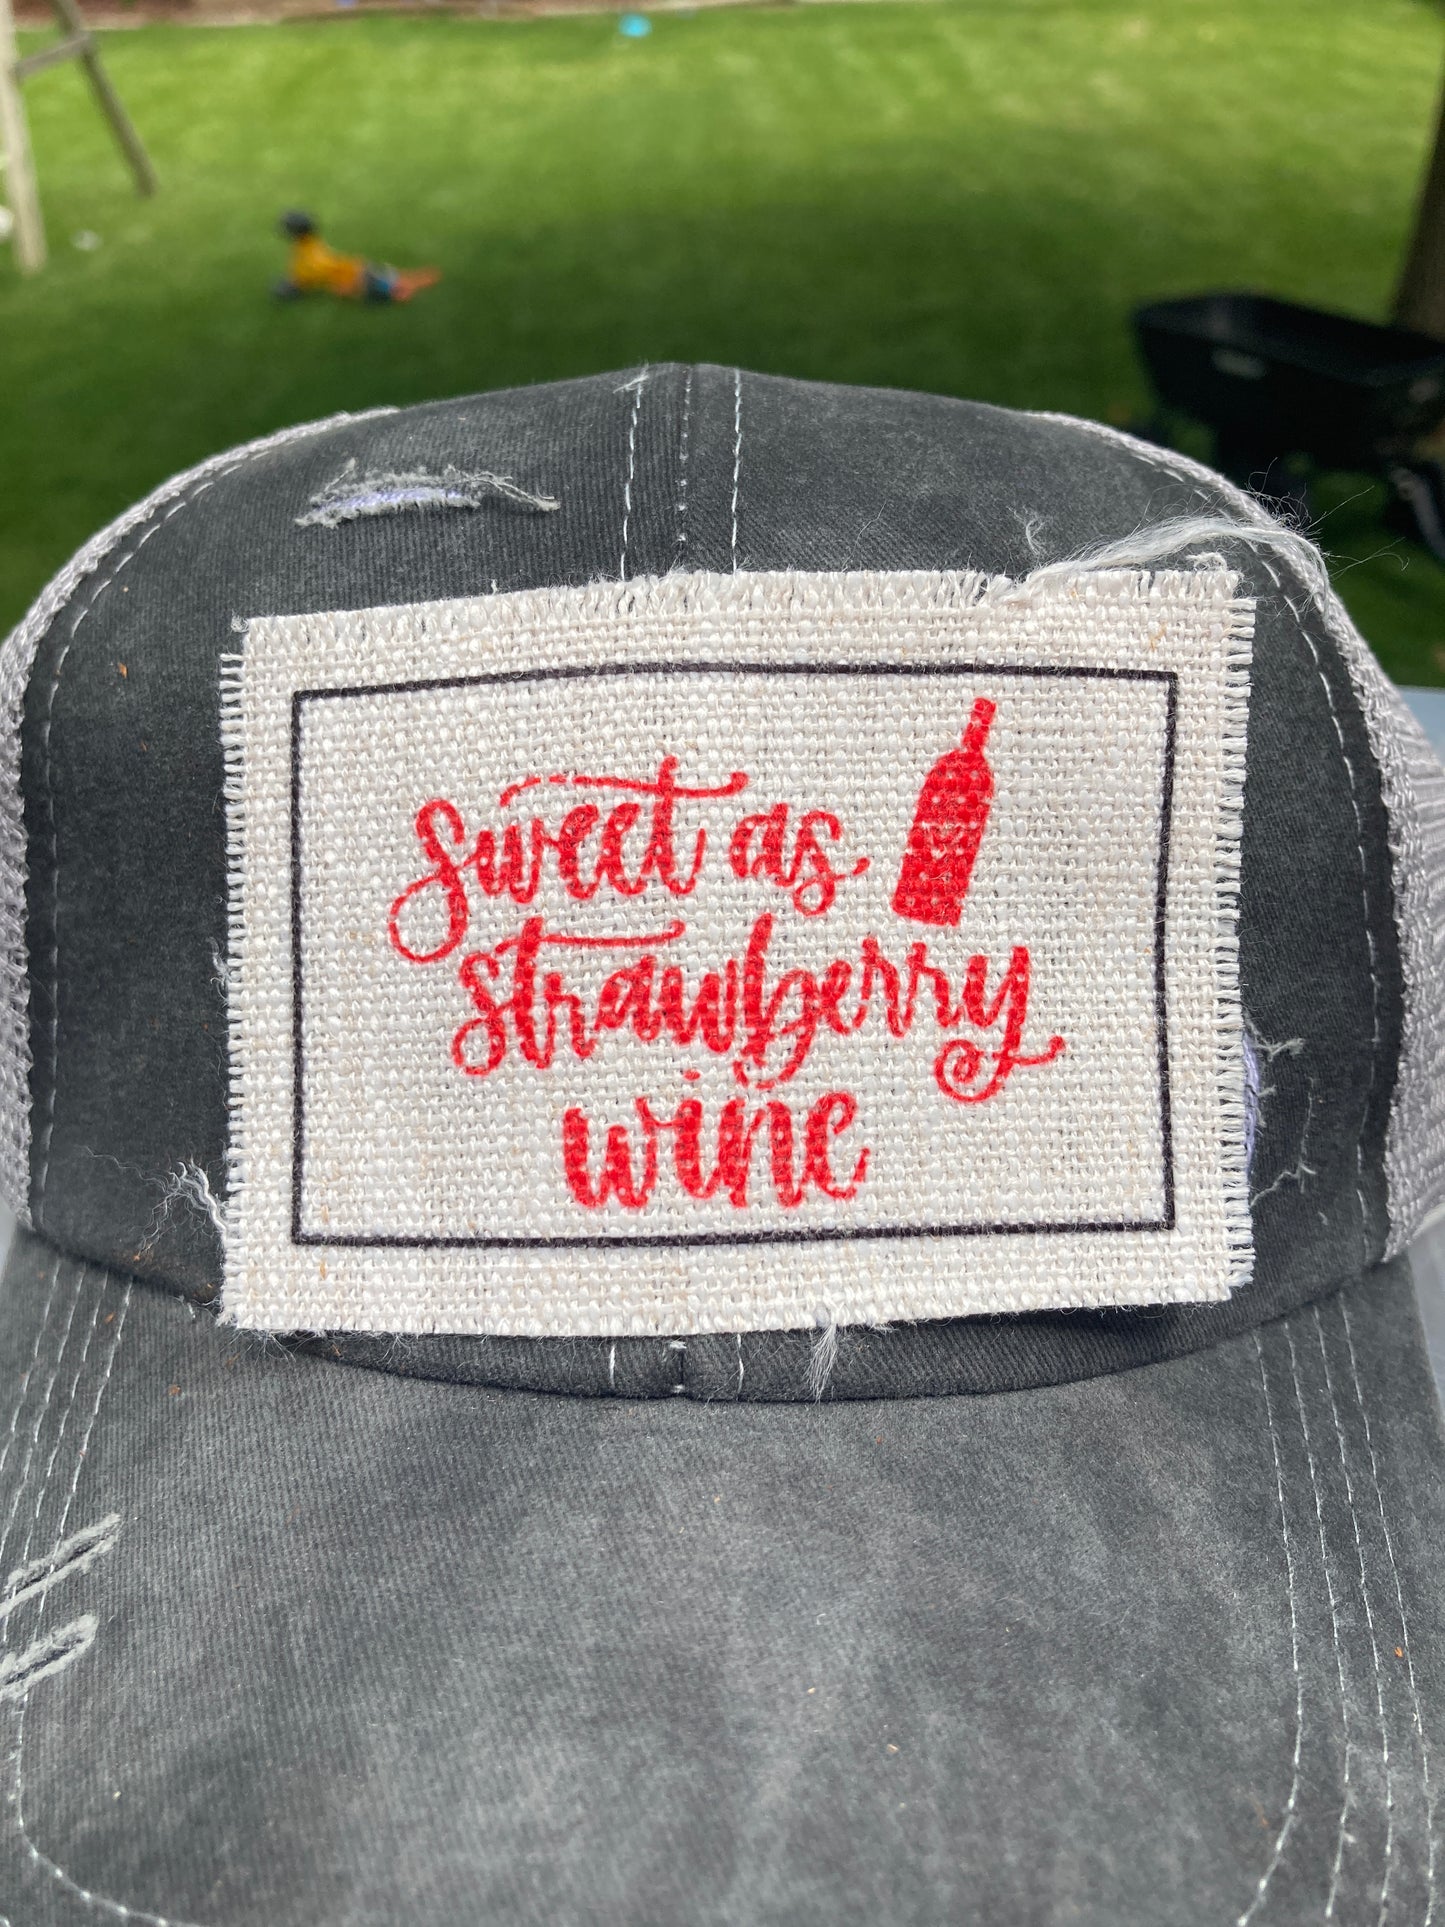 Sweet as Strawberry Wine Hat Patch